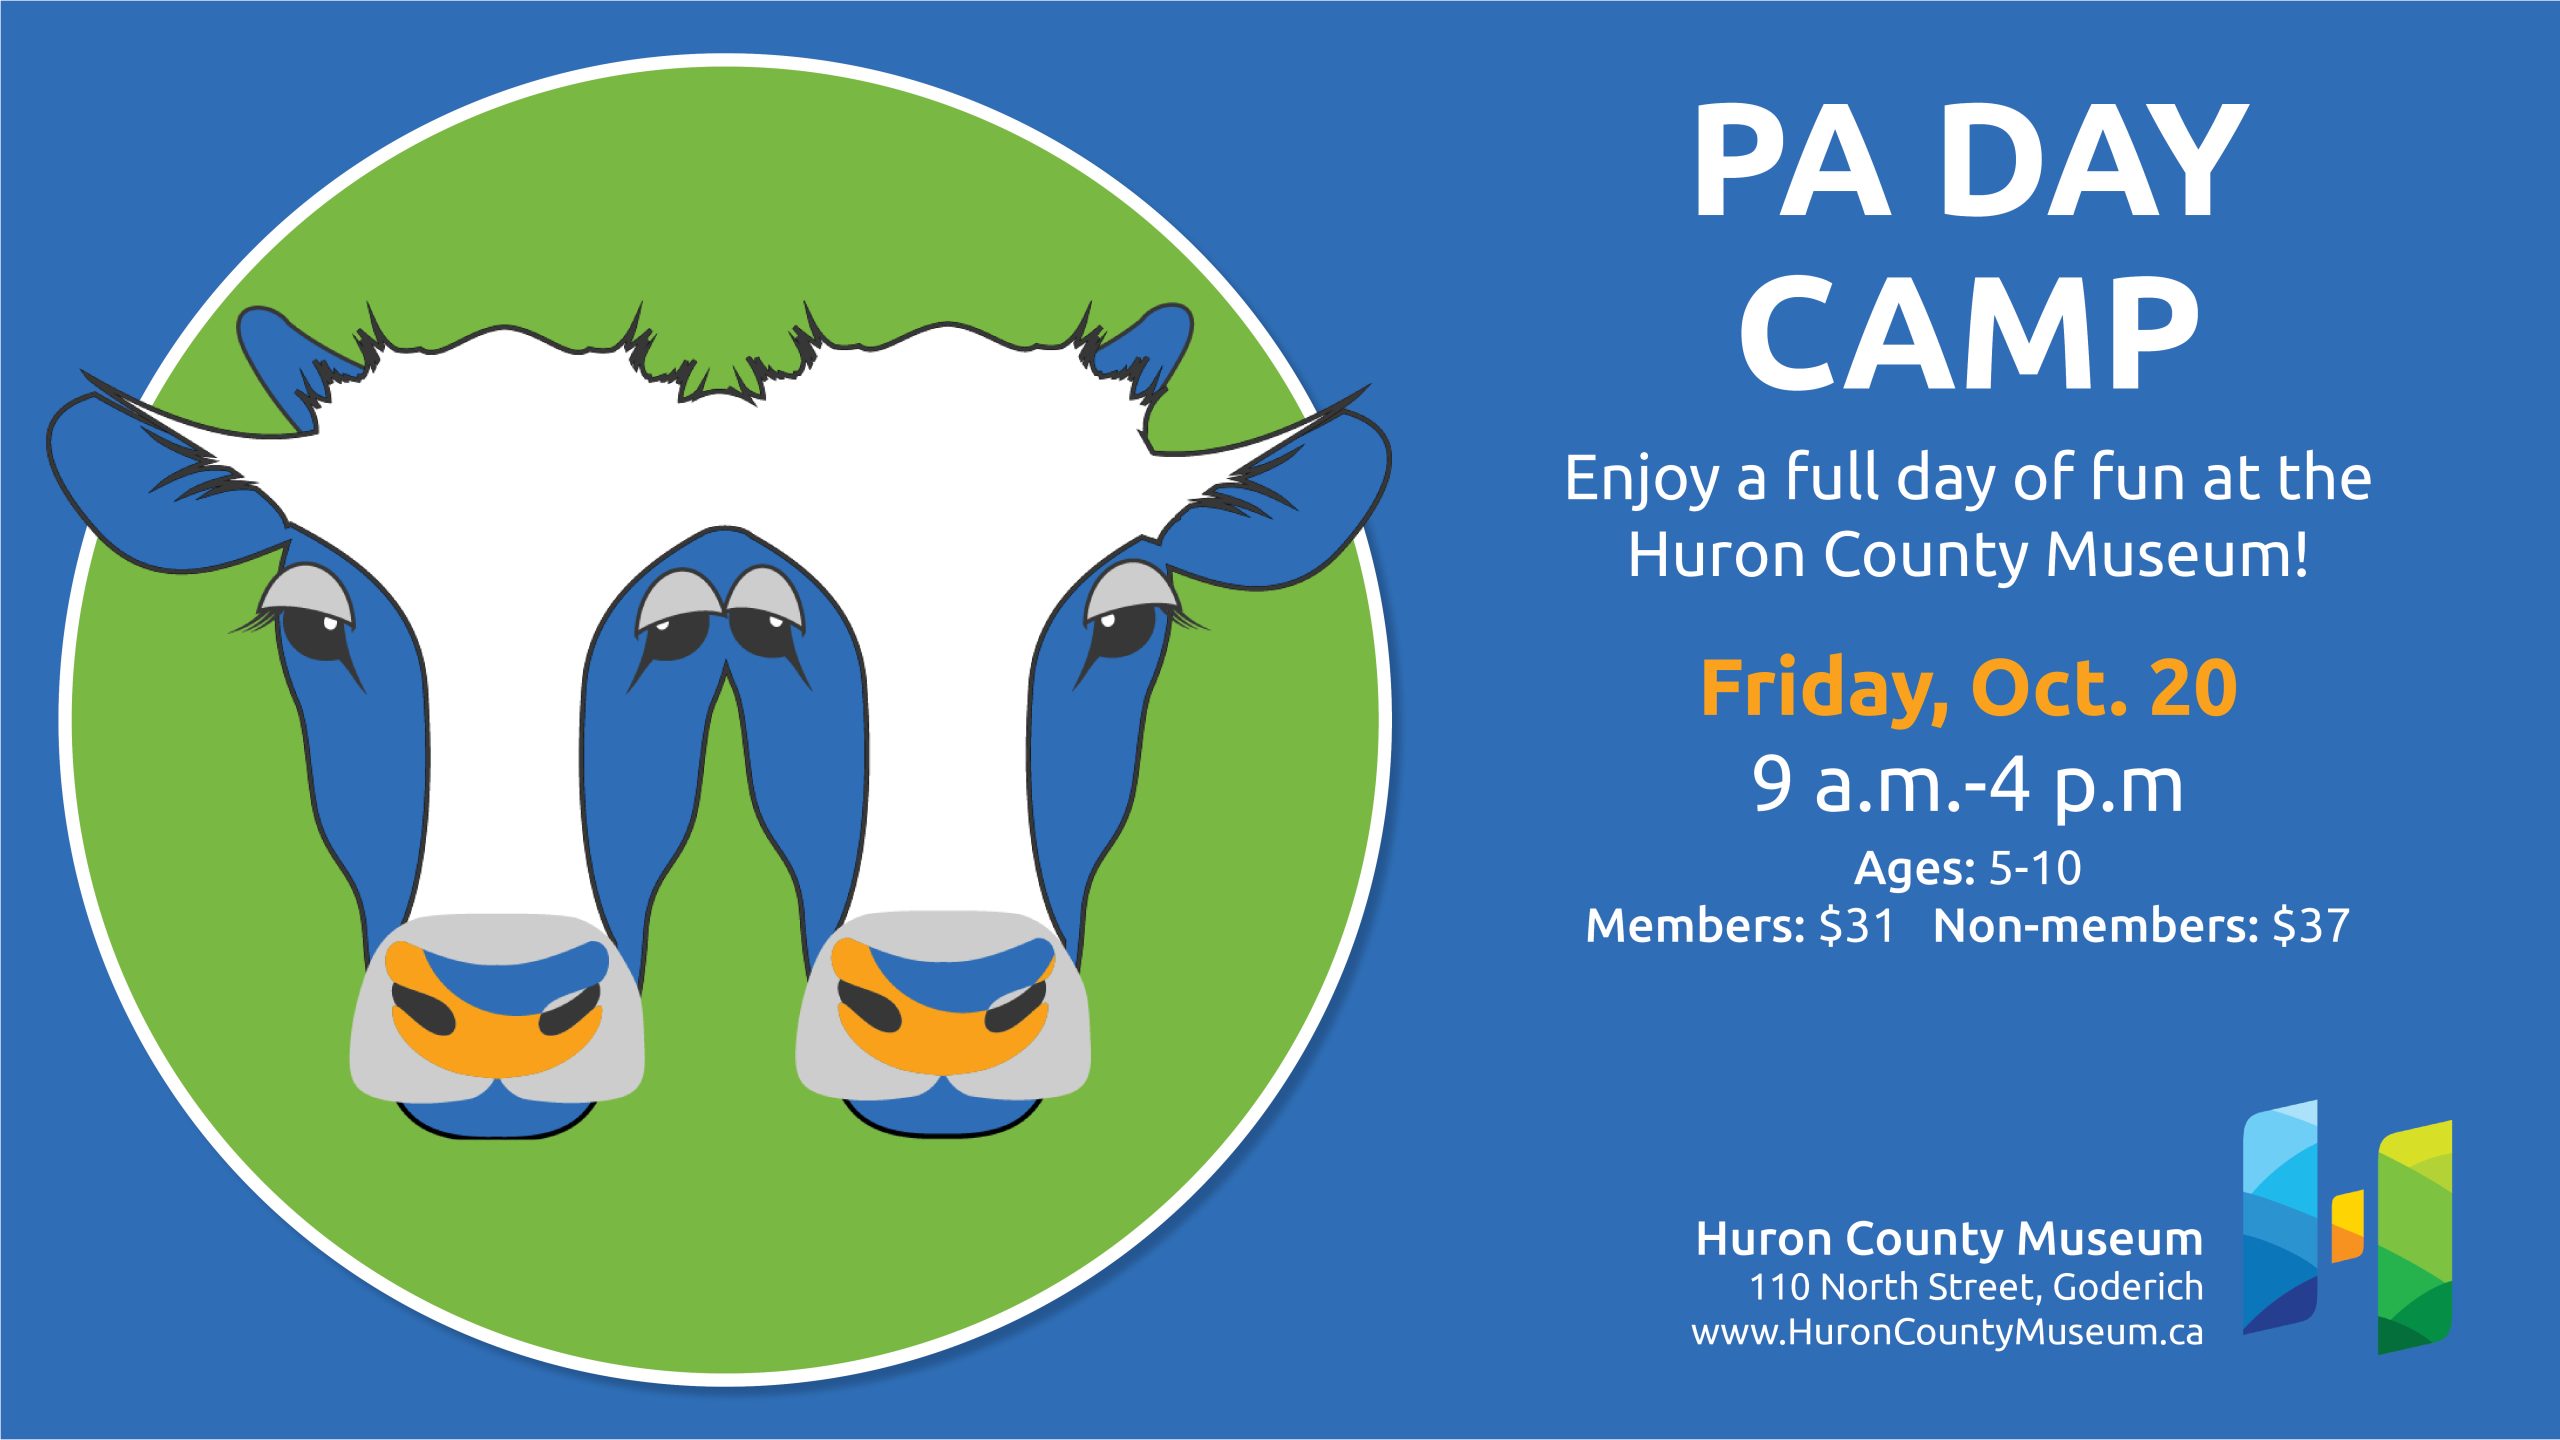 Illustration of a two-headed calf with text promoting PA Day camp at the museum